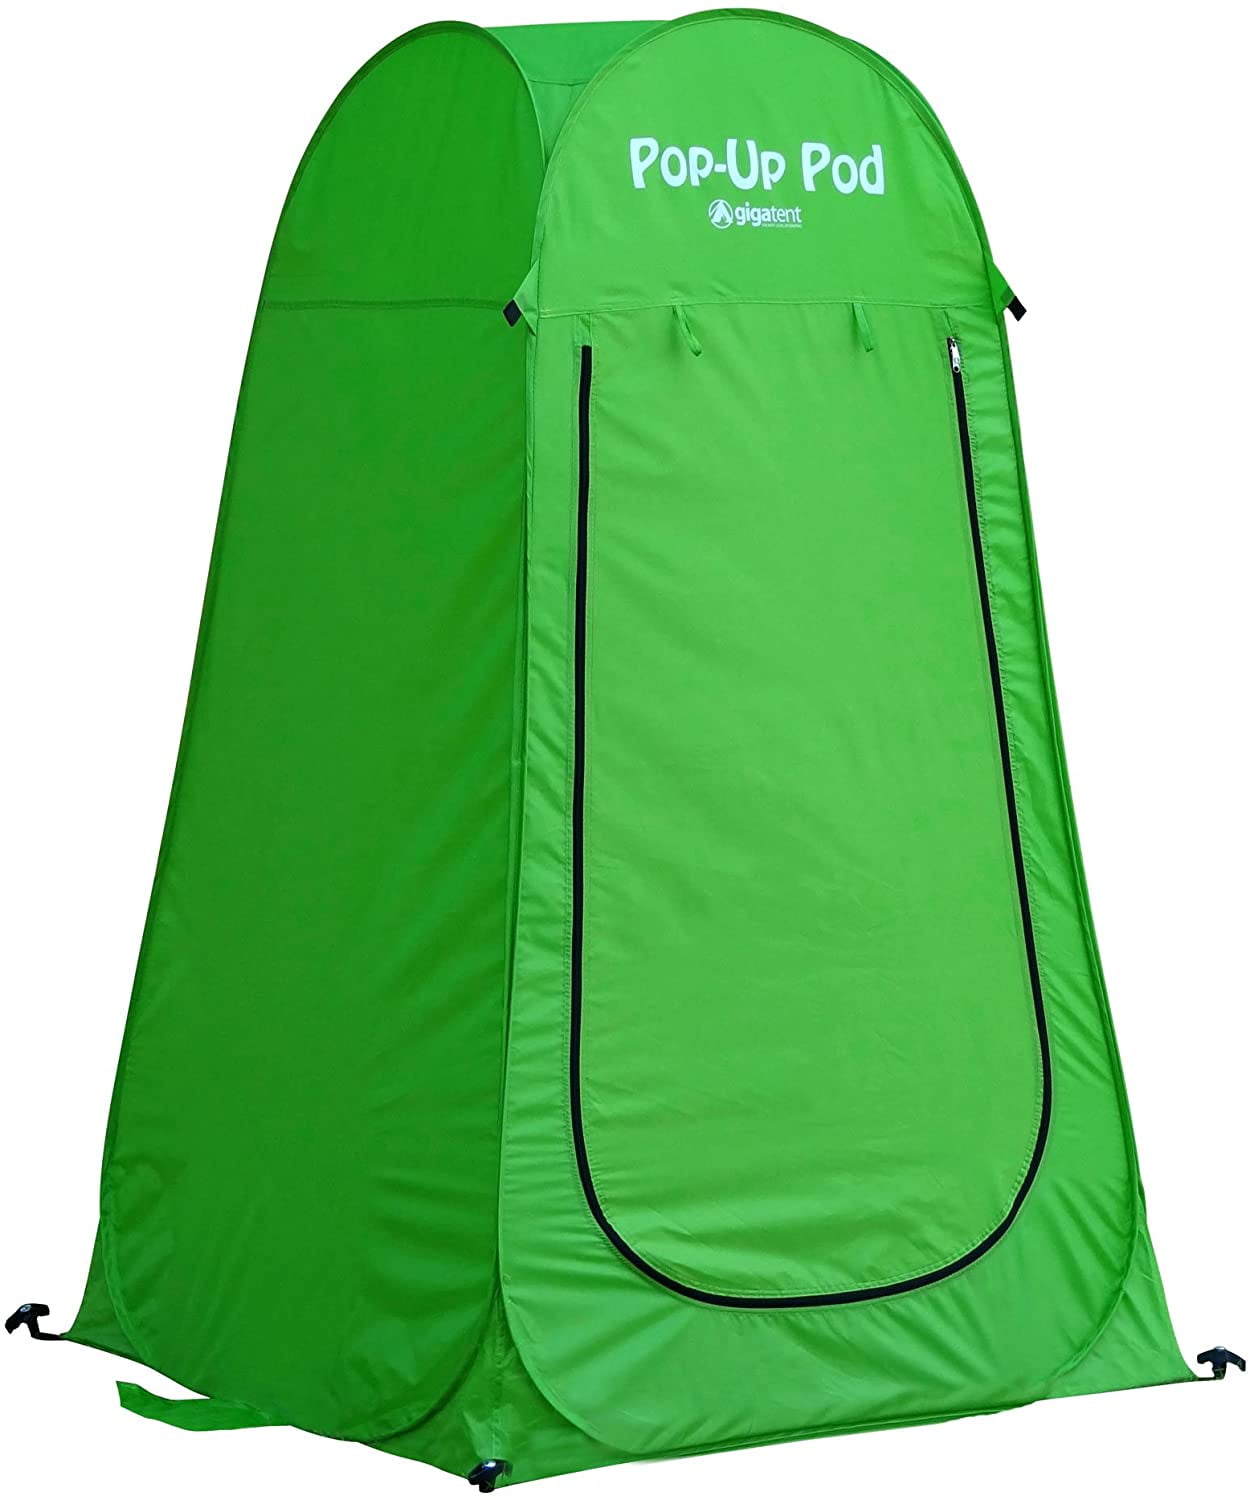 Portable Pop Up Privacy Tent Camping Shower Tent Instant Outdoor Shower Tent Camp Toilet Changing Room For Outdoors Hiking Travel Bulary123 Pop Up Pod Changing Room Privacy Tent